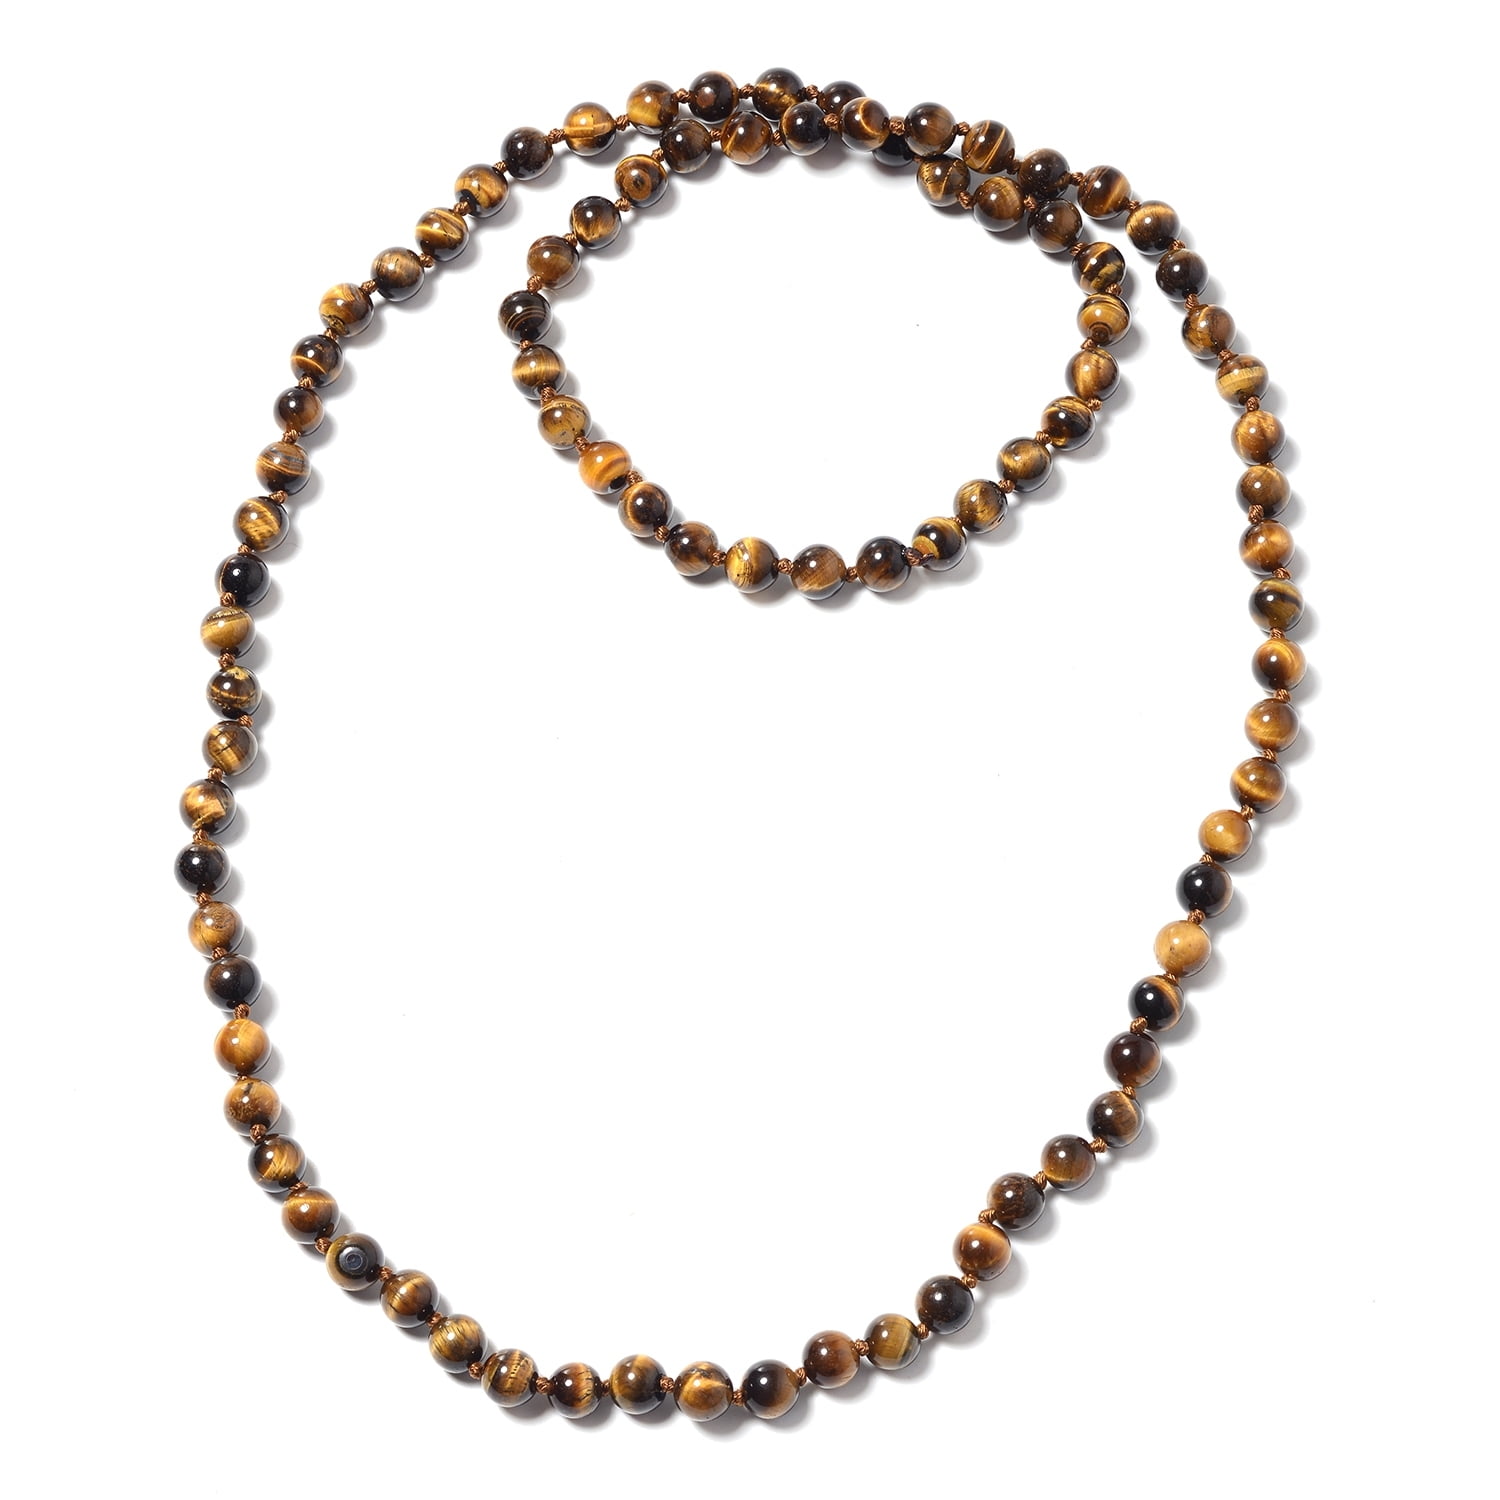 Smooth Round Opaque Bead Mardi Gras Necklace Gold Pack of 12 